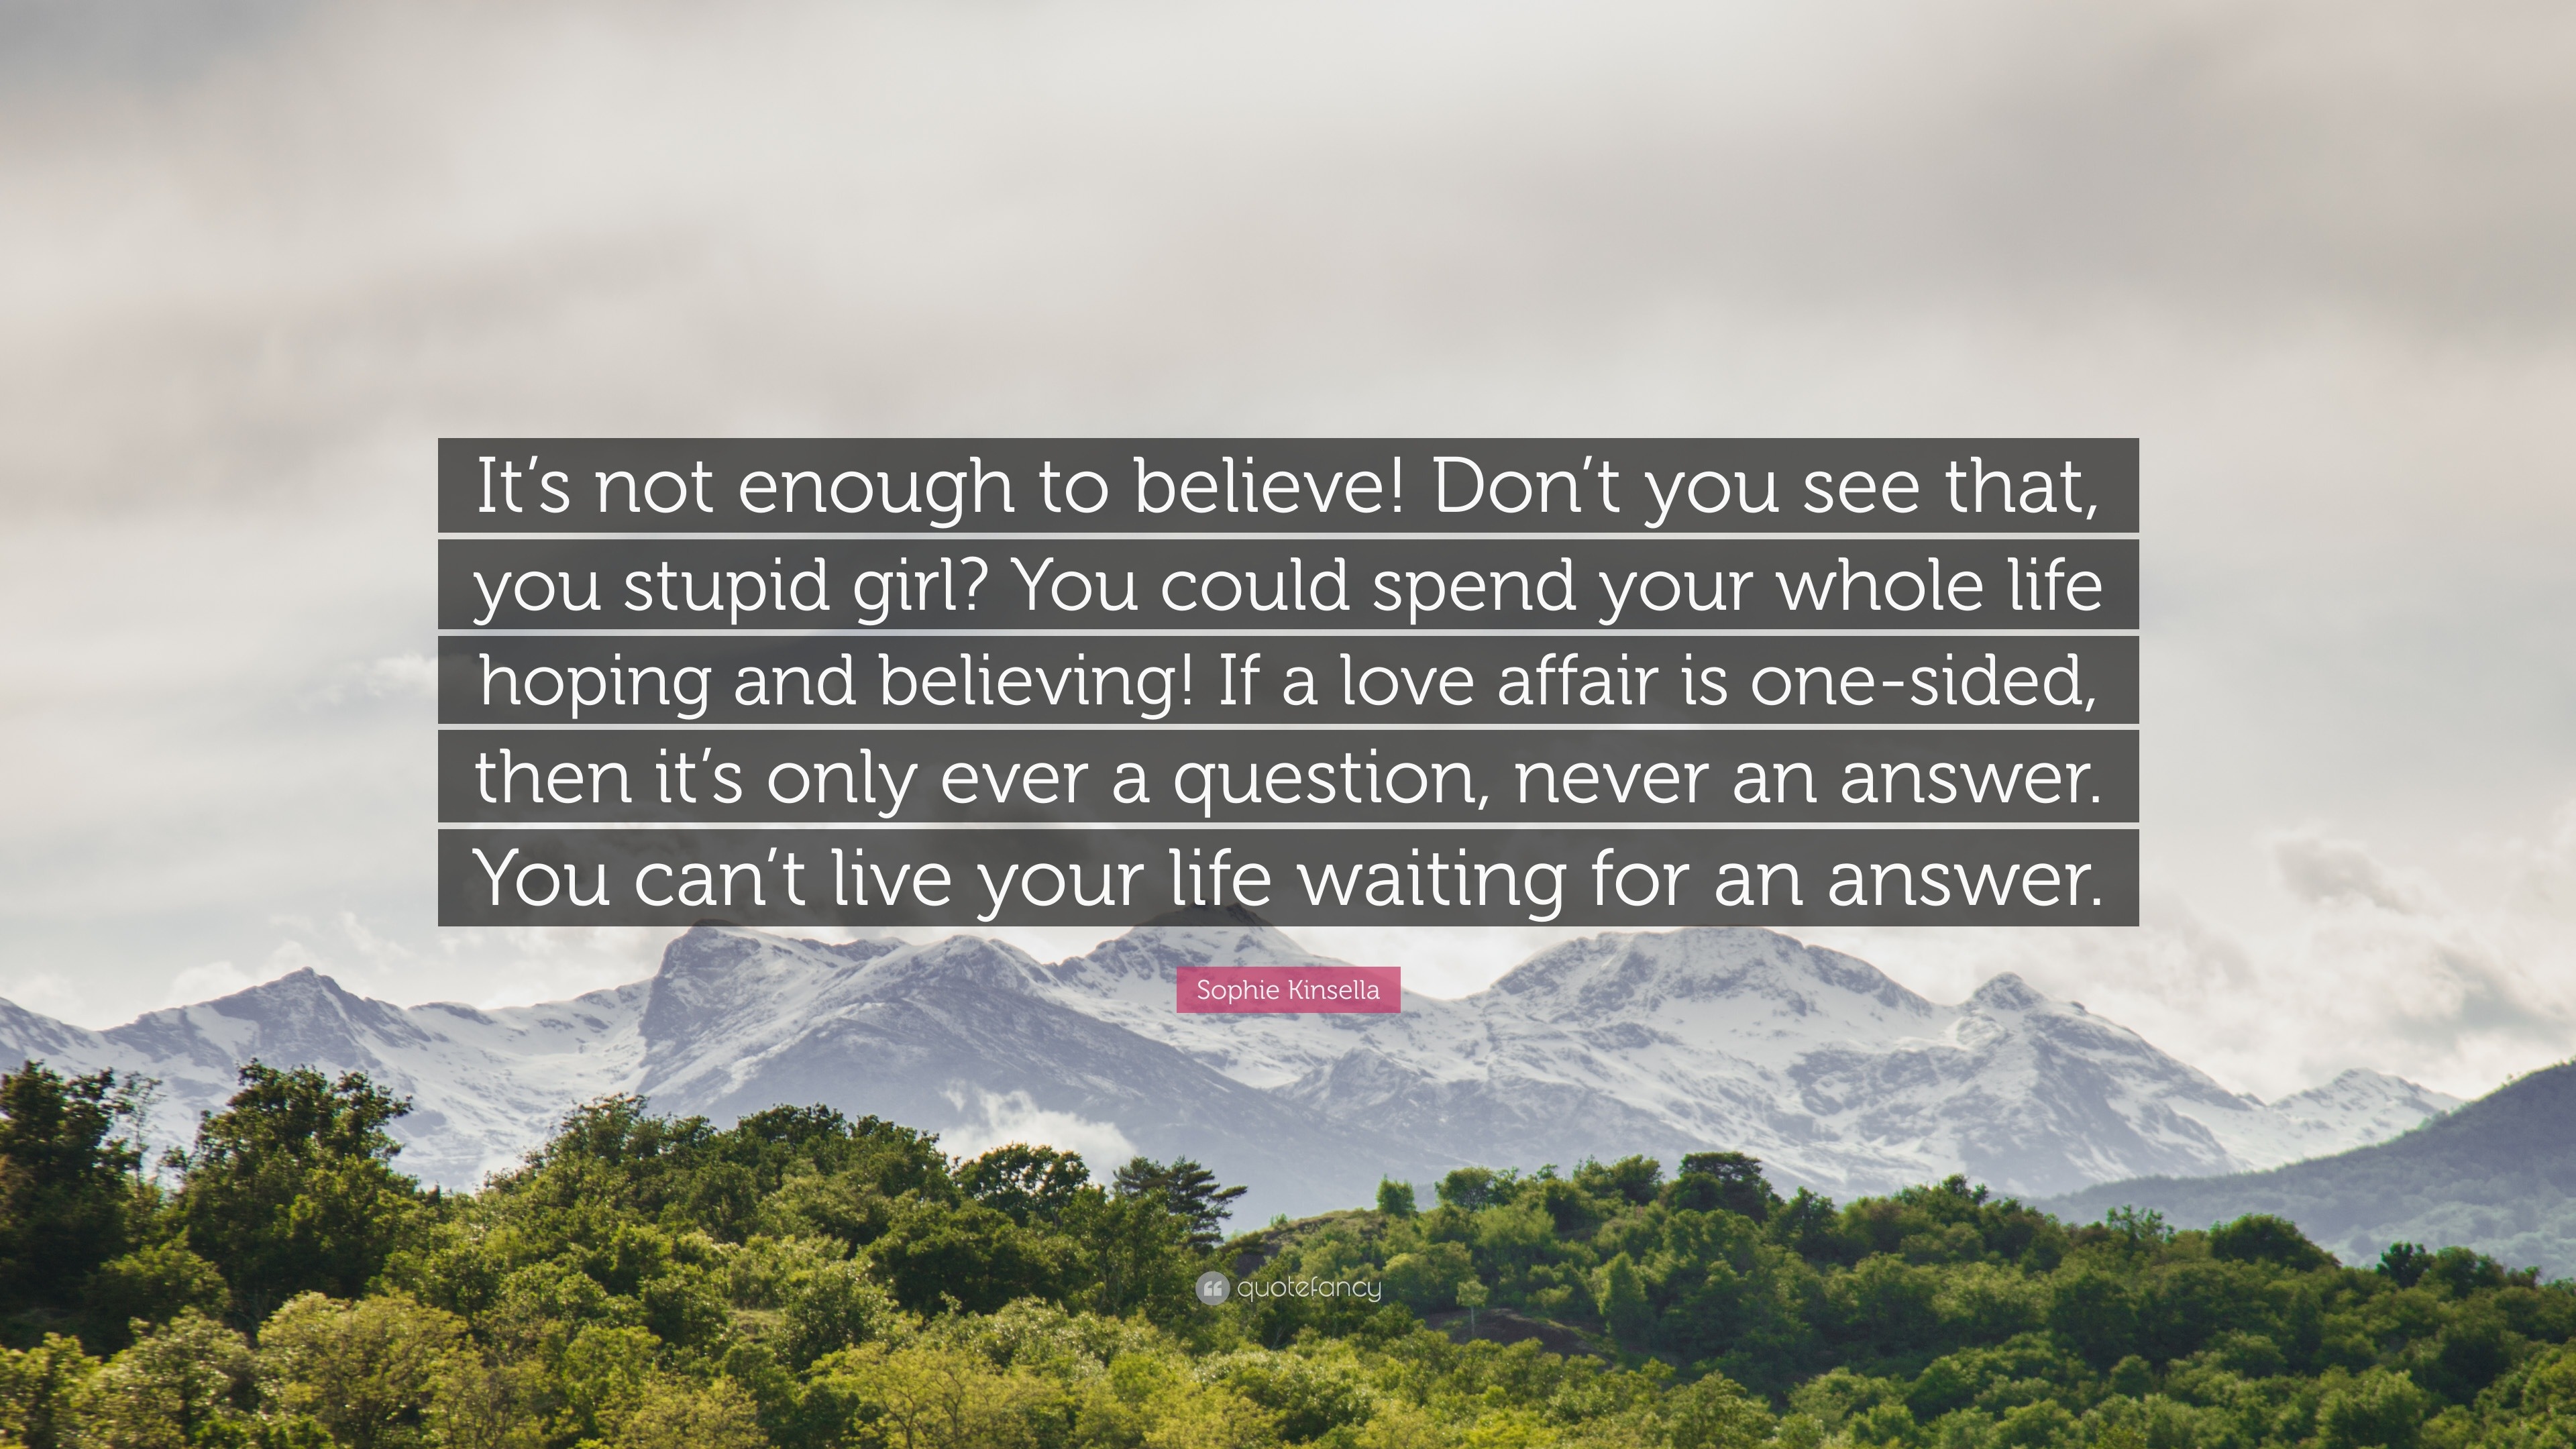 Sophie Kinsella Quote “It s not enough to believe Don t you see